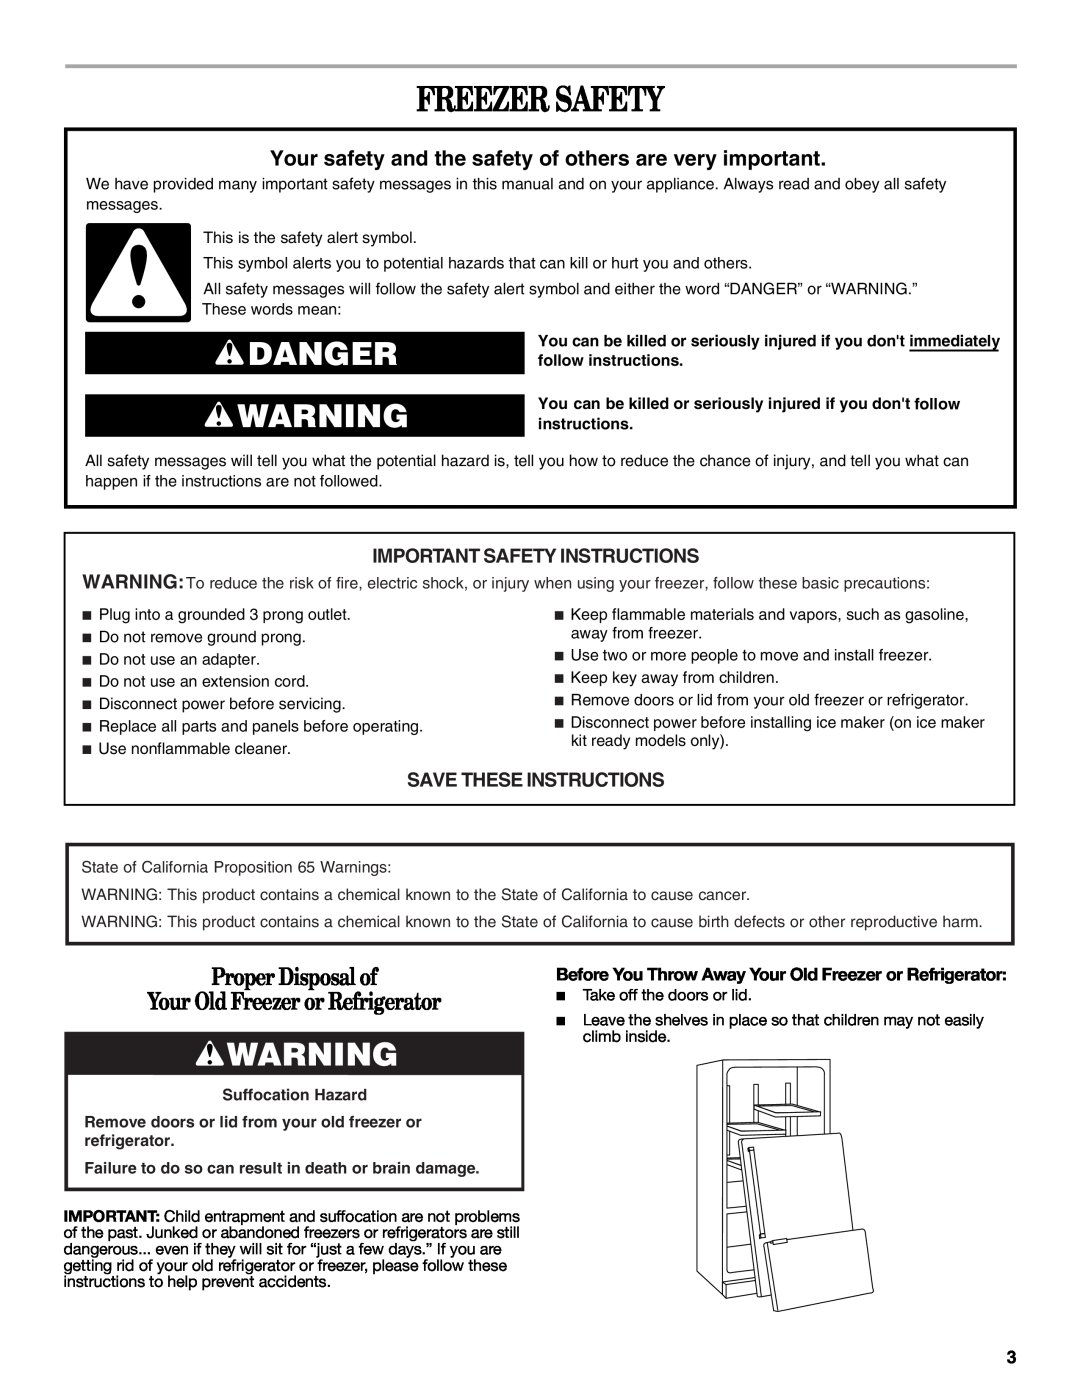 Whirlpool W10326800B Freezer Safety, Danger, Proper Disposal of Your Old Freezer or Refrigerator, Save These Instructions 